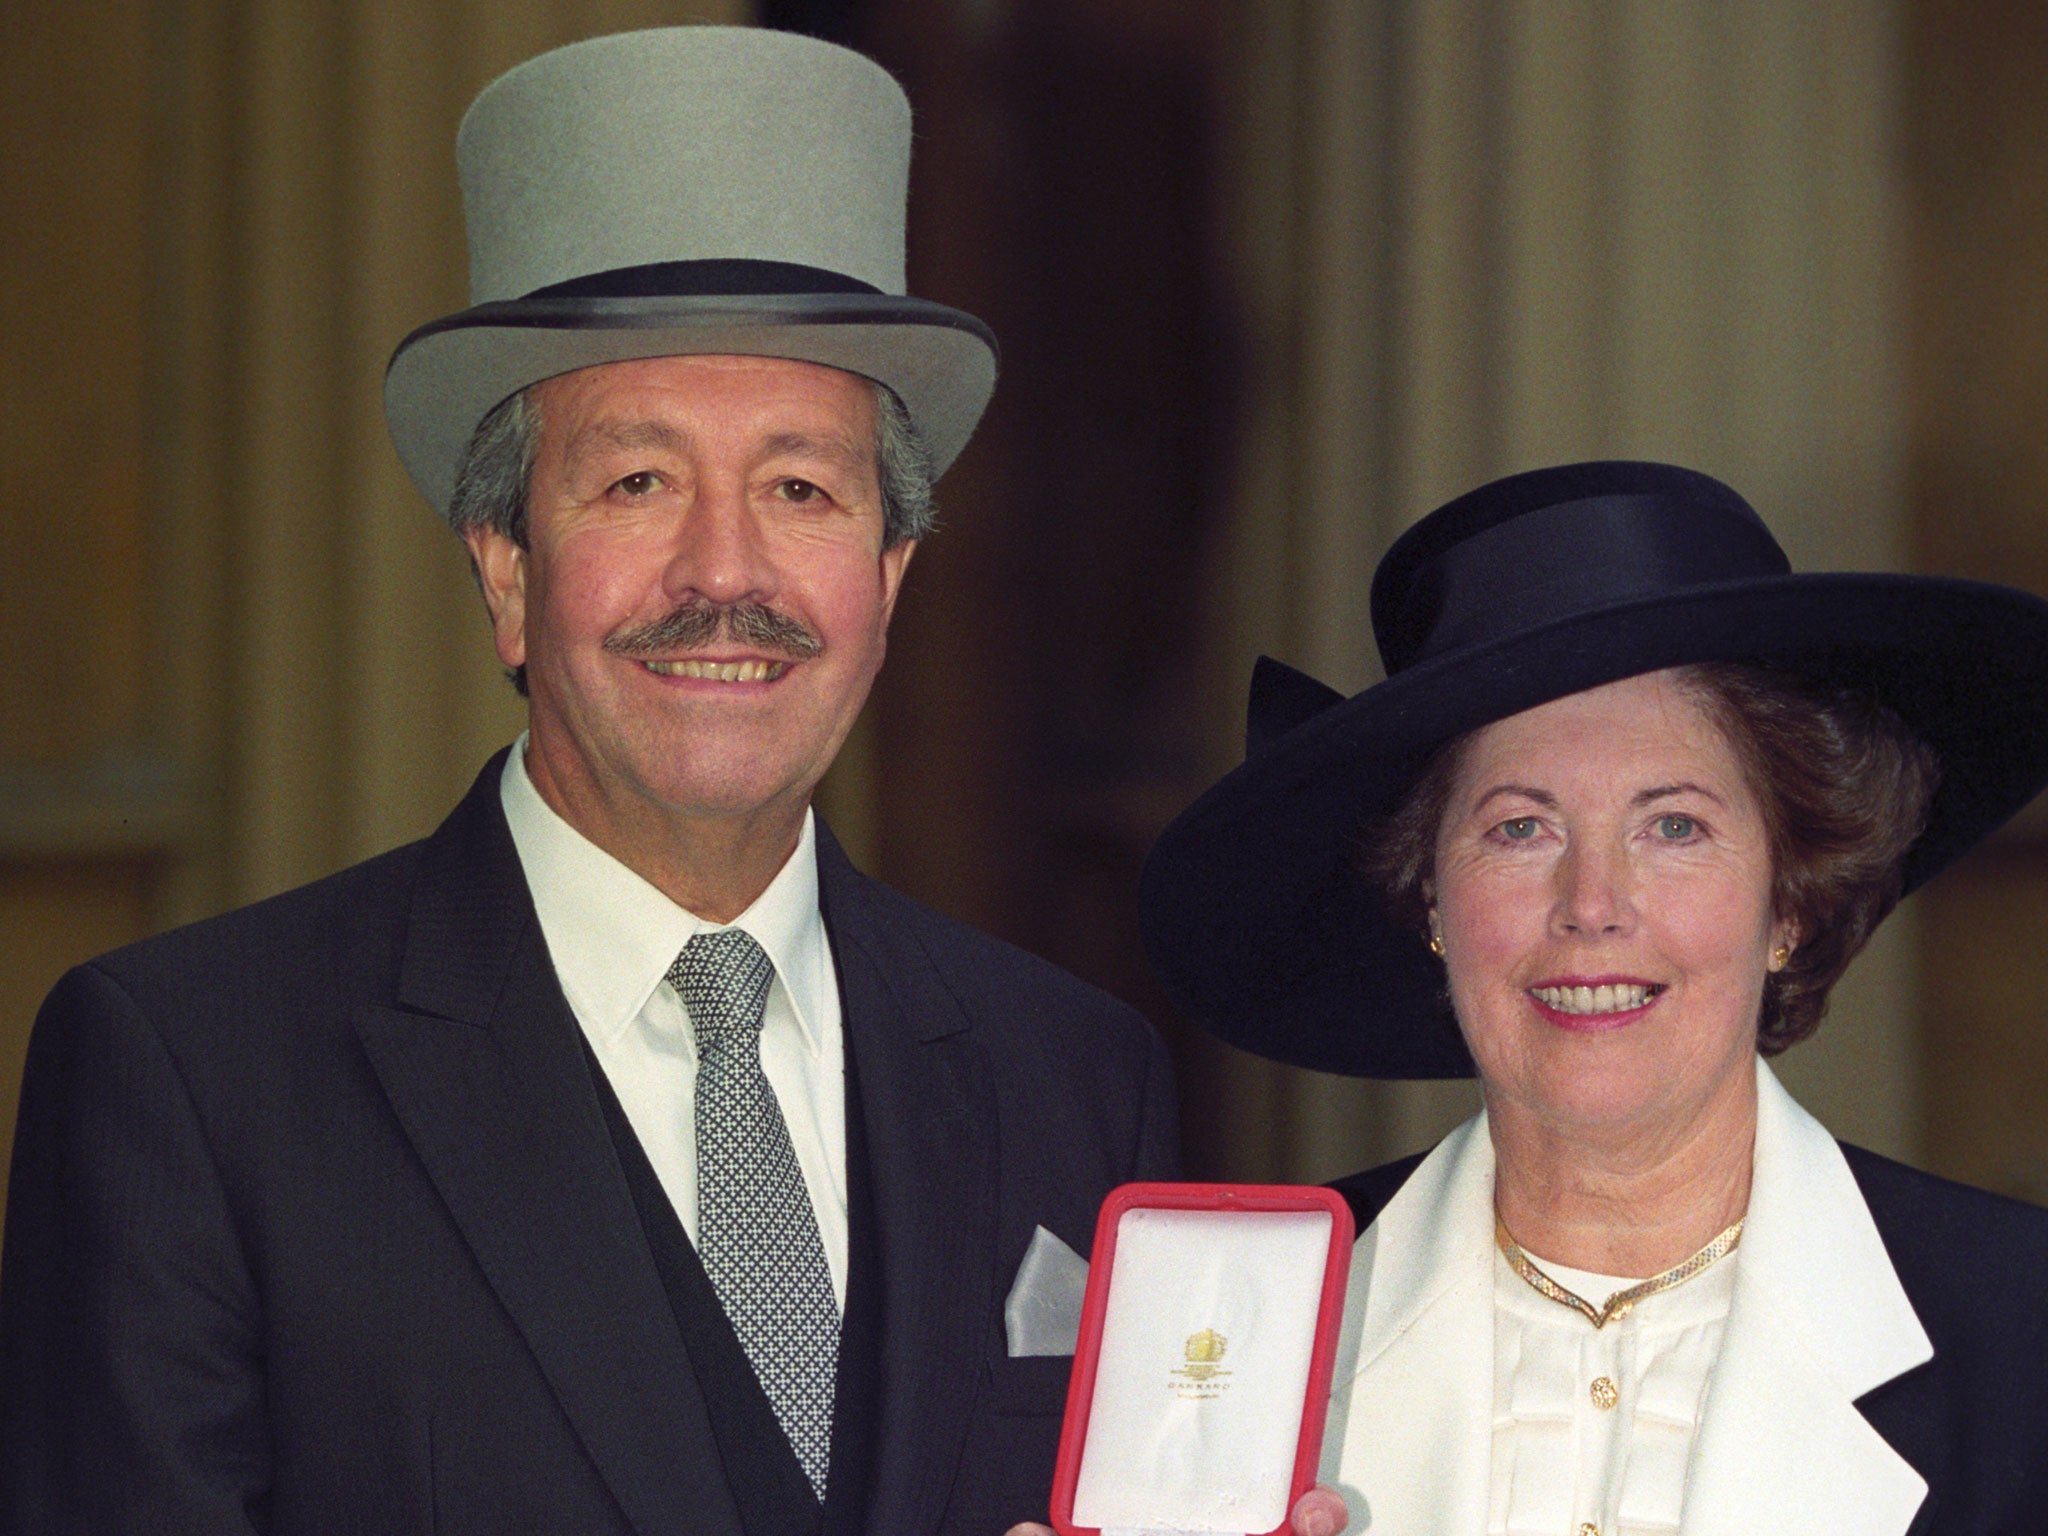 Sir Gil Thompson, pictured with his wife, Dorothy, was knighted in 1993, having transformed civil aviation in the North